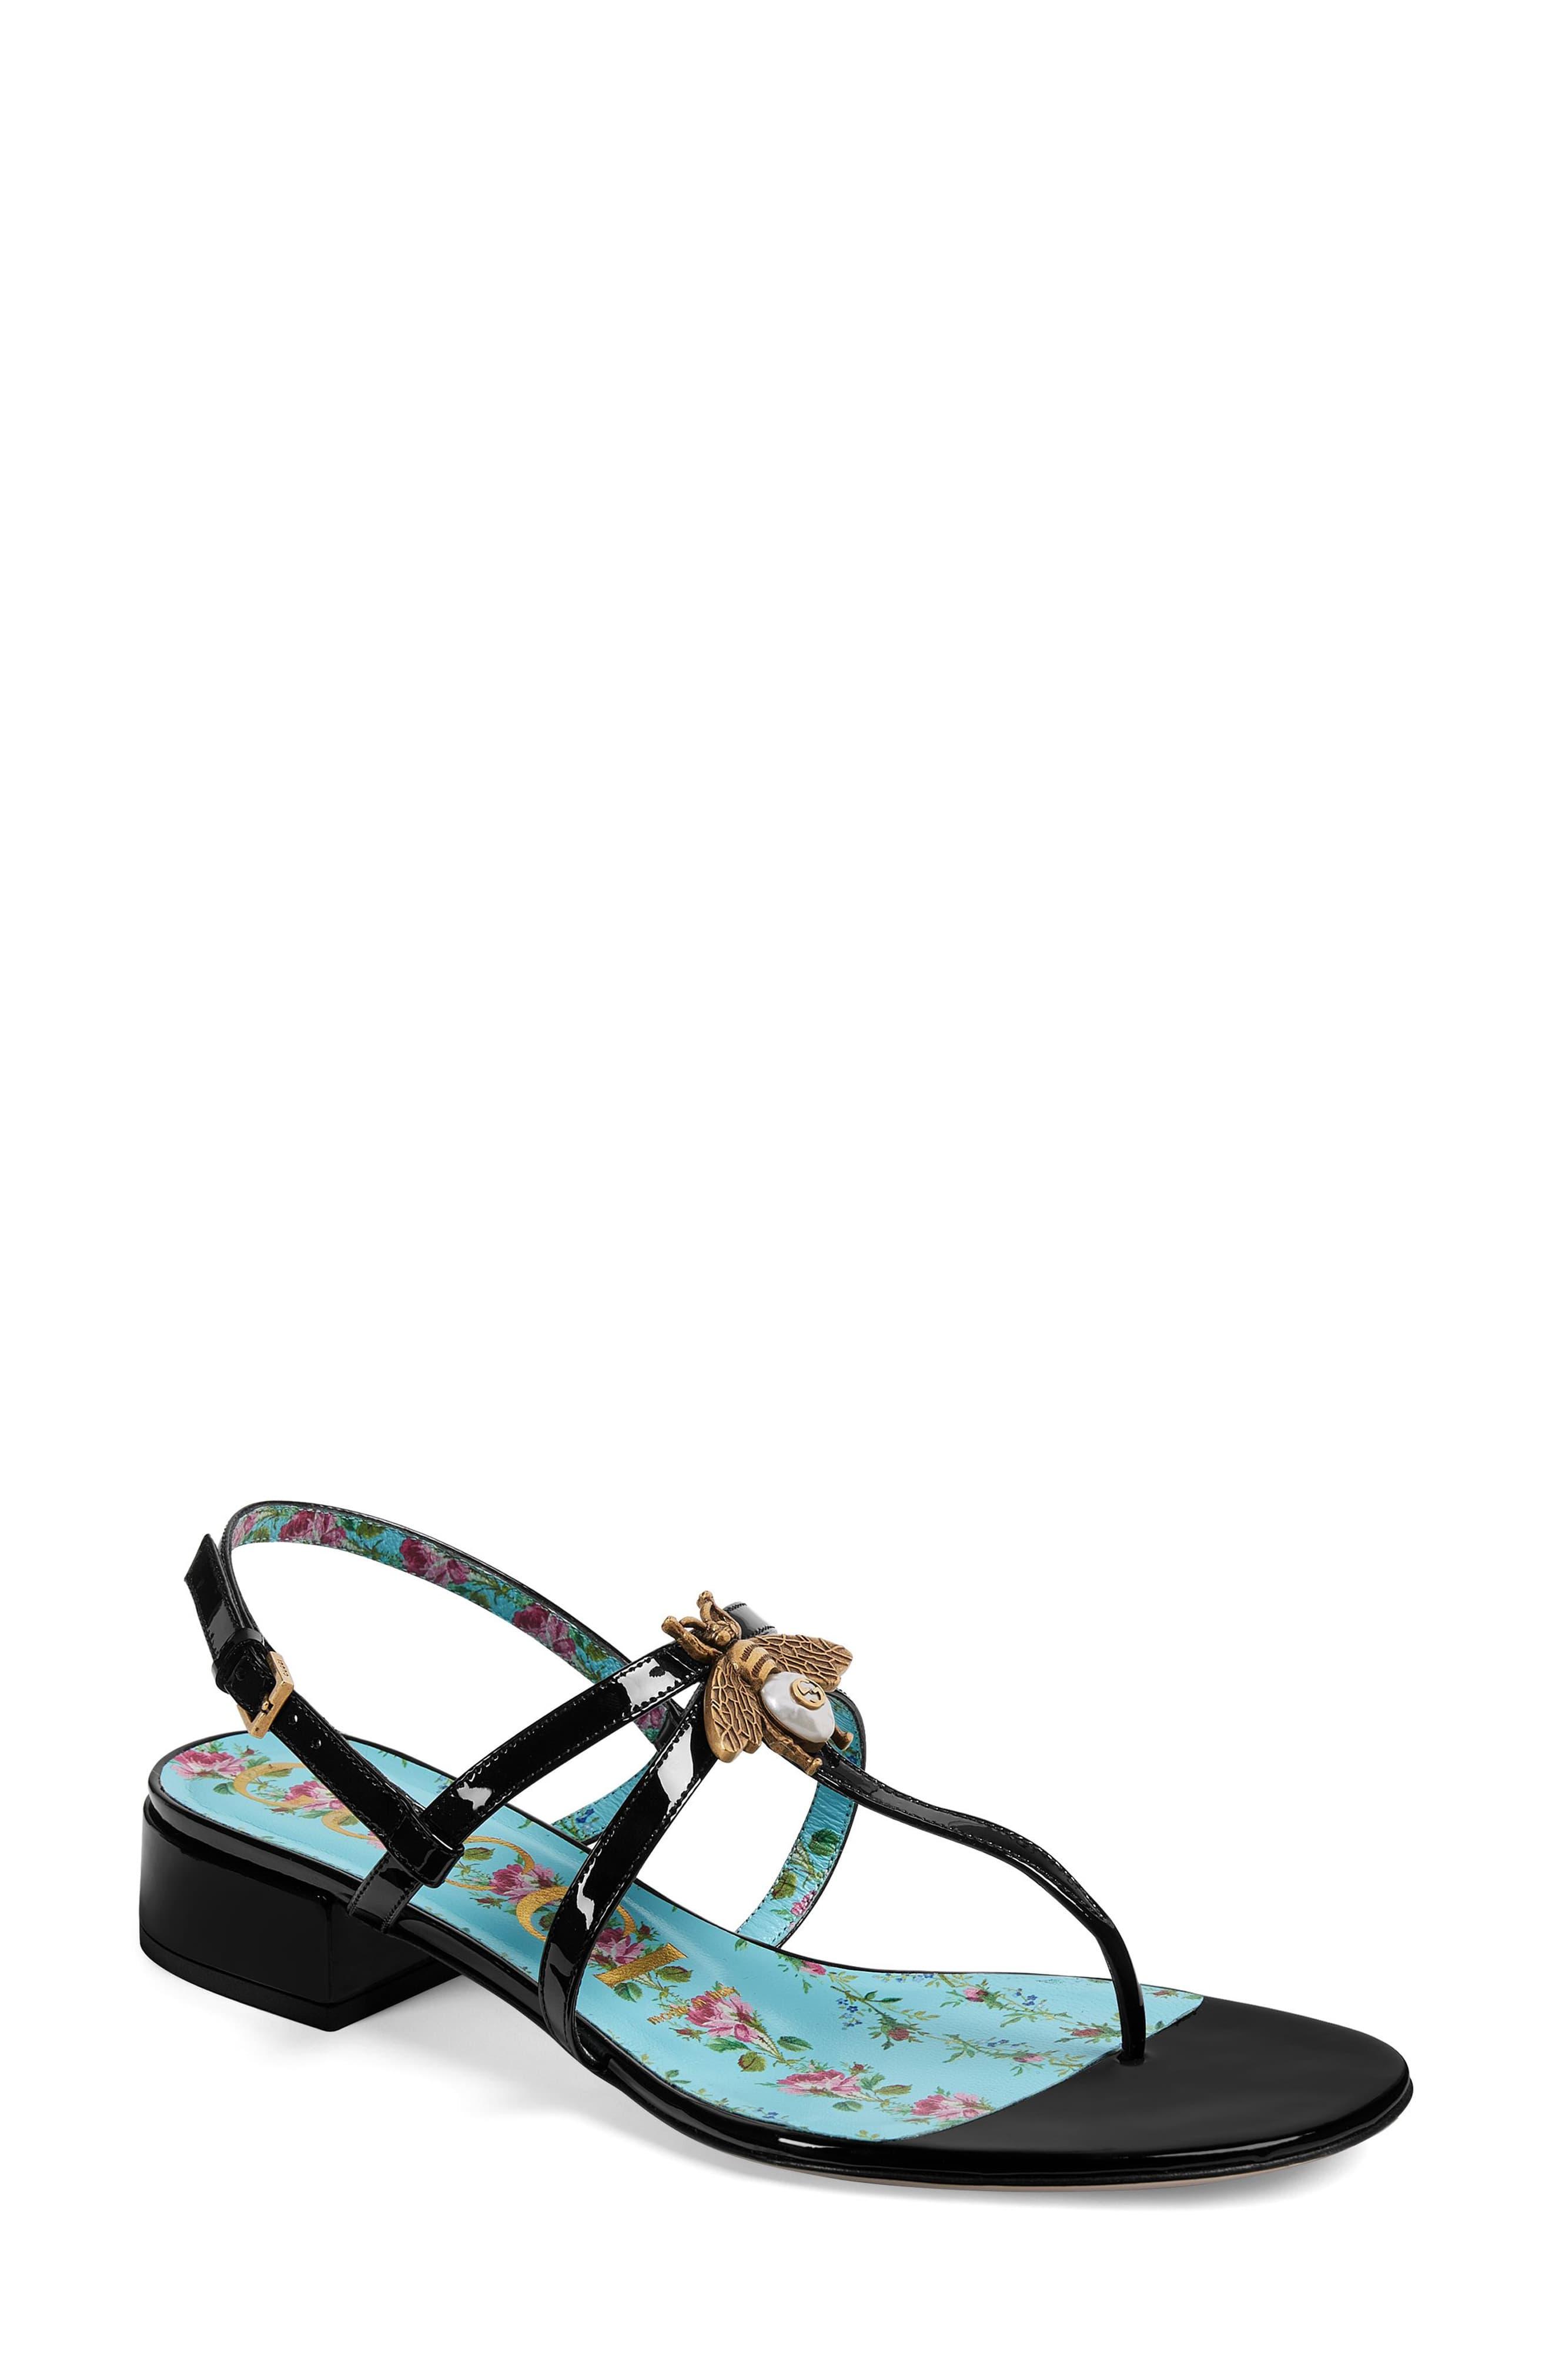 gucci sandals with bee